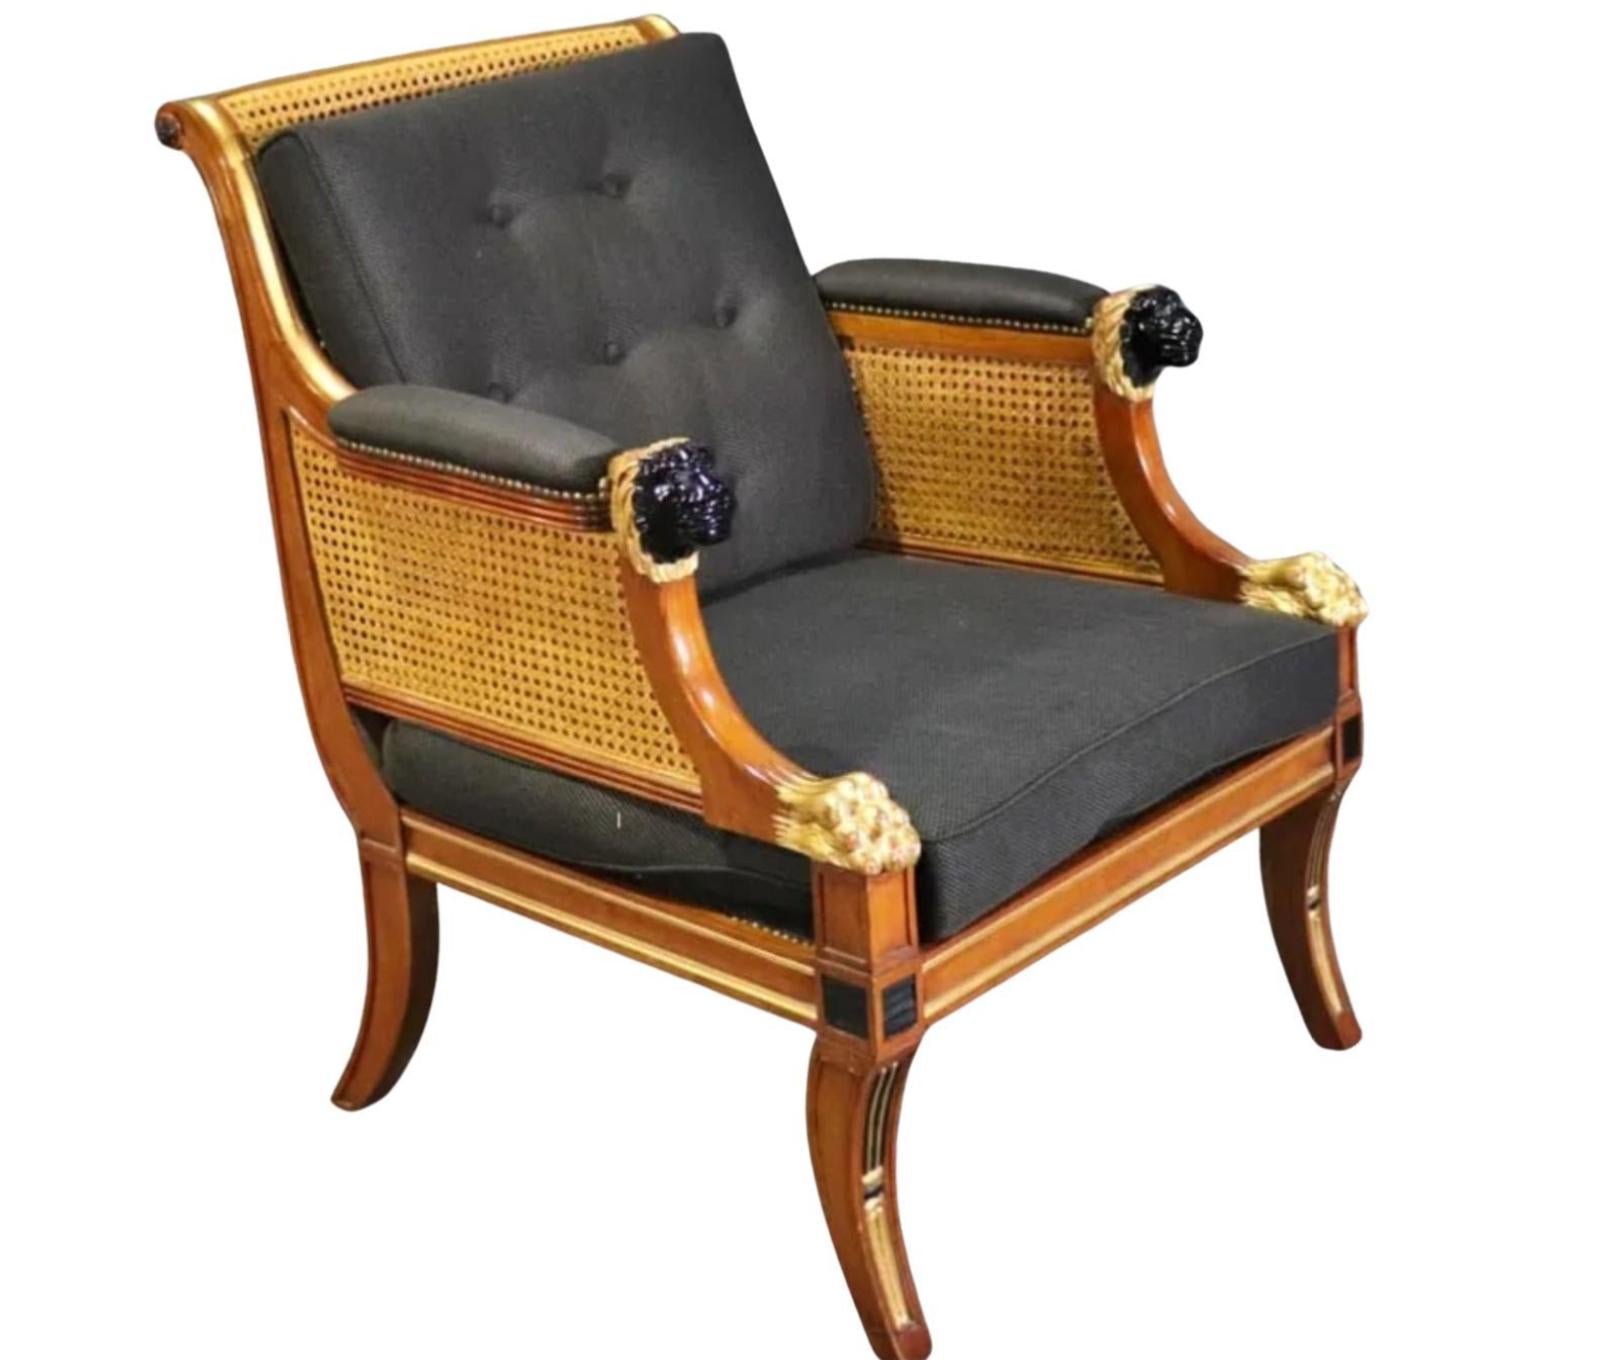 19th C Style Regency Mahogany Cane Back Giltwood Bergere Armchair. It is an exquisite example with Ebony lion hear arms and Giltwood paw details.